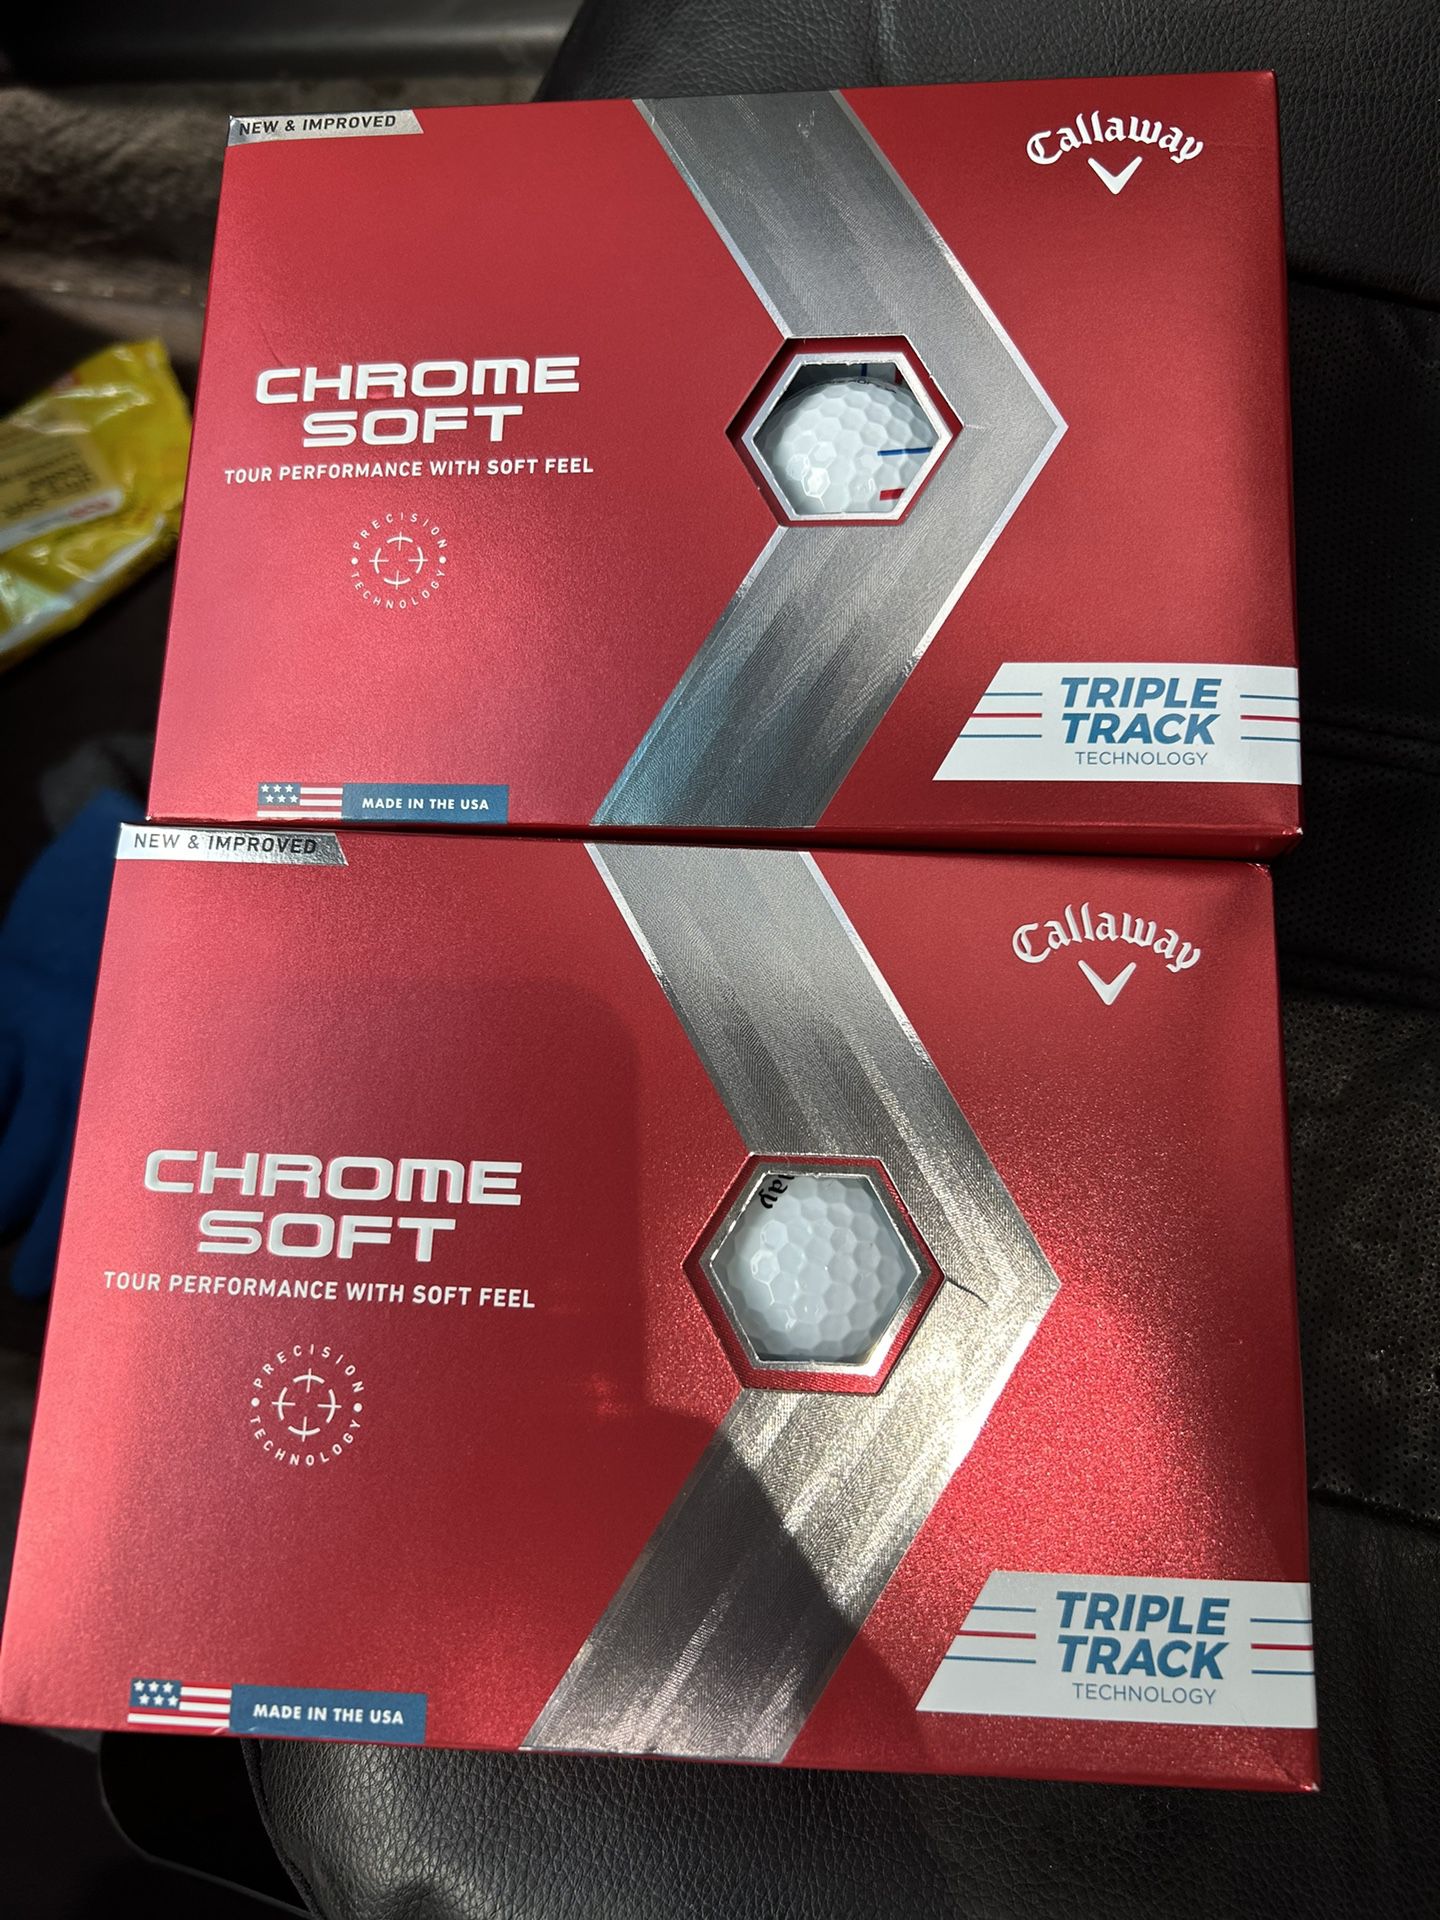 2 Boxes of Callaway Chrome soft 